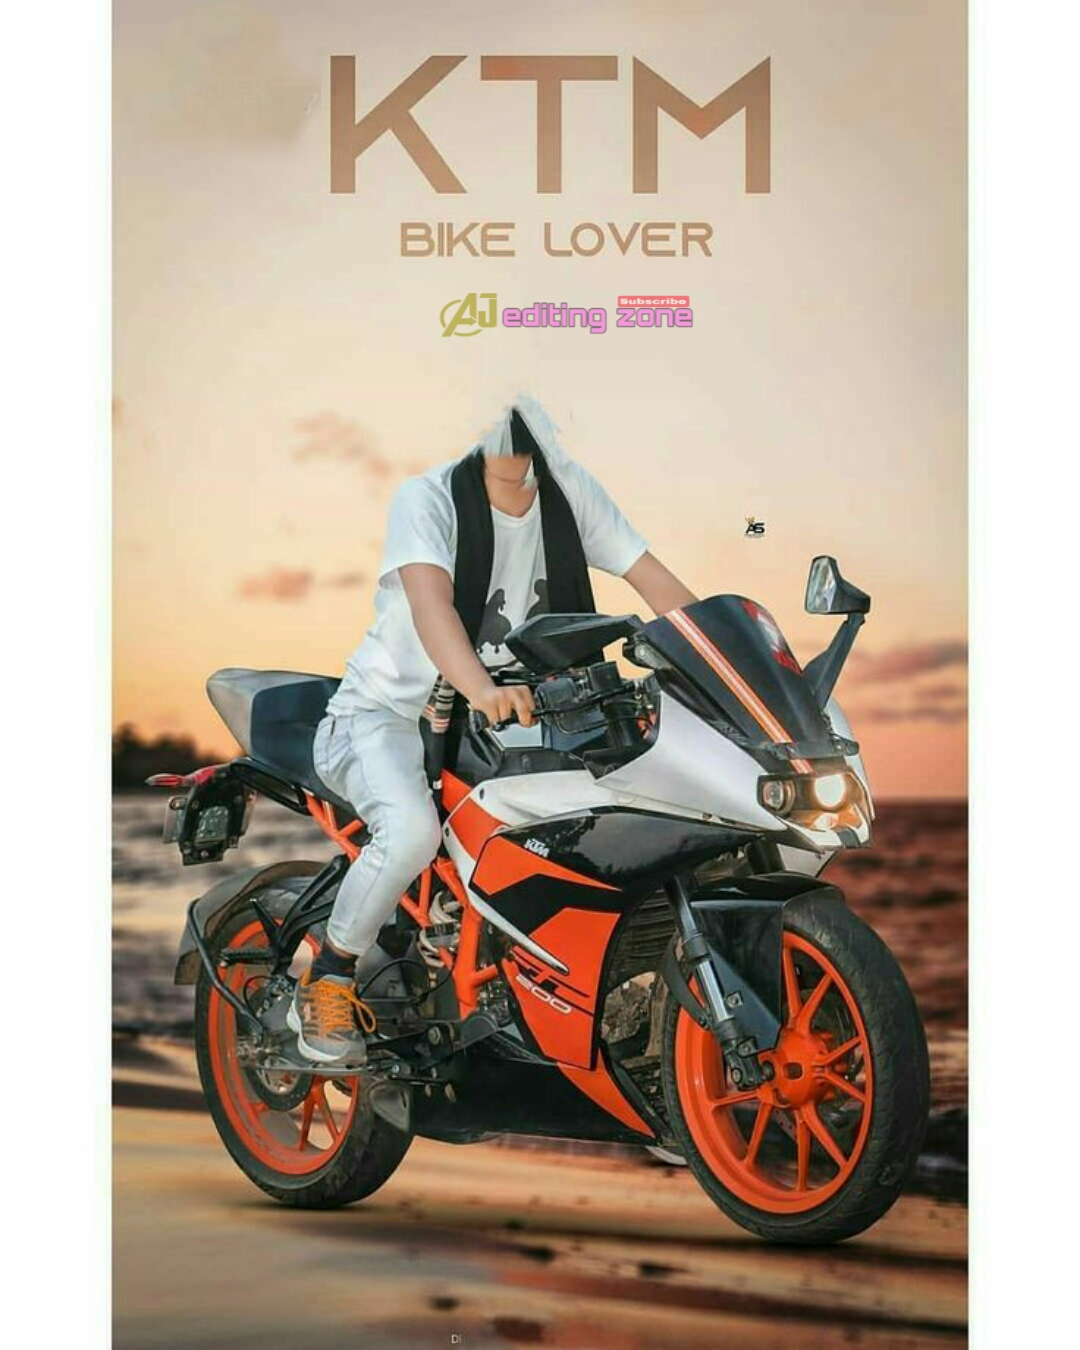 Ktm Bike Photo Editing Cb Backgrounds for Boys | Bike Photo Photo Shoot Poses Without Face for Editing | aj editing zone